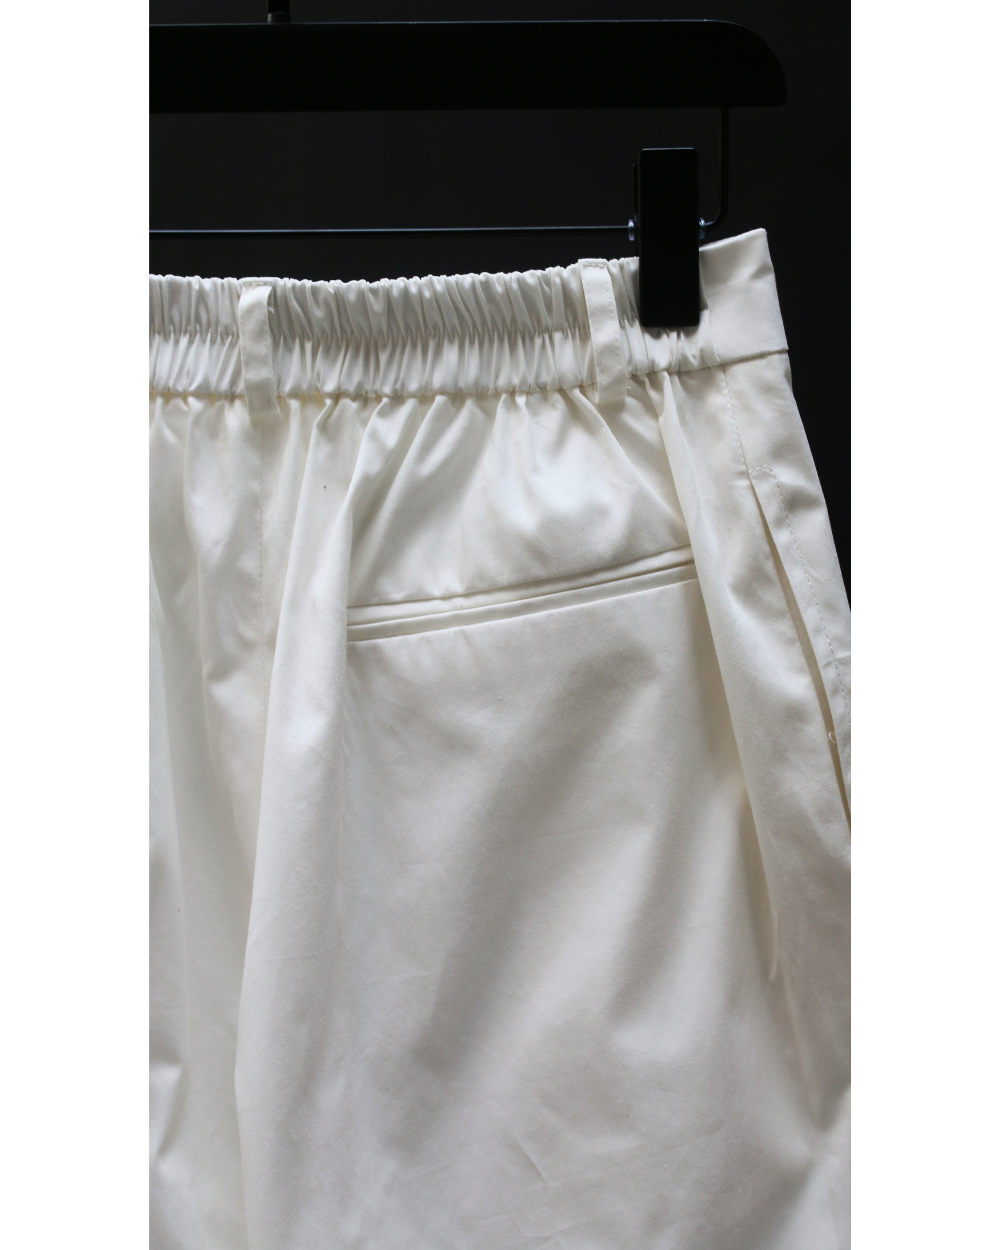 white-tuck-tapered-pants-ain-astoud